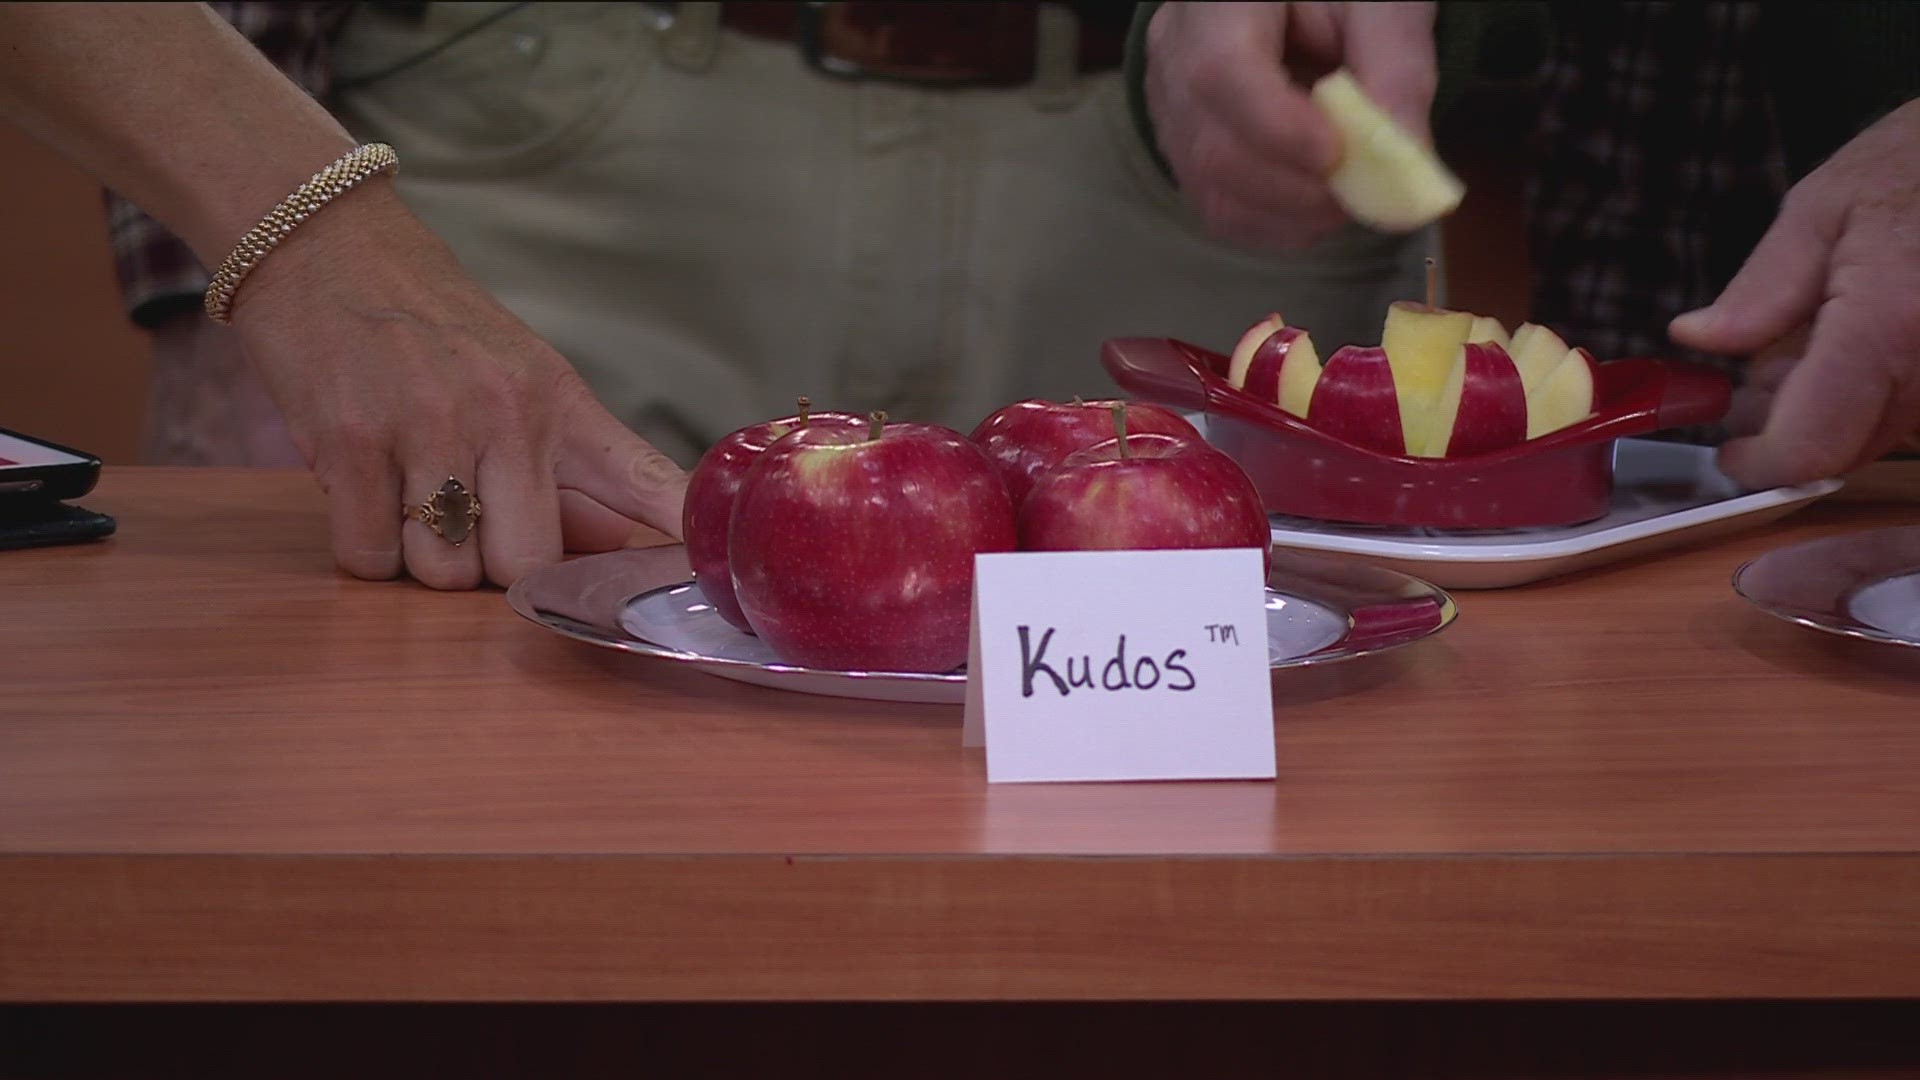 The Kudos apple, developed by researchers at the University of Minnesota, is a combination of the Honeycrisp and Zestar.